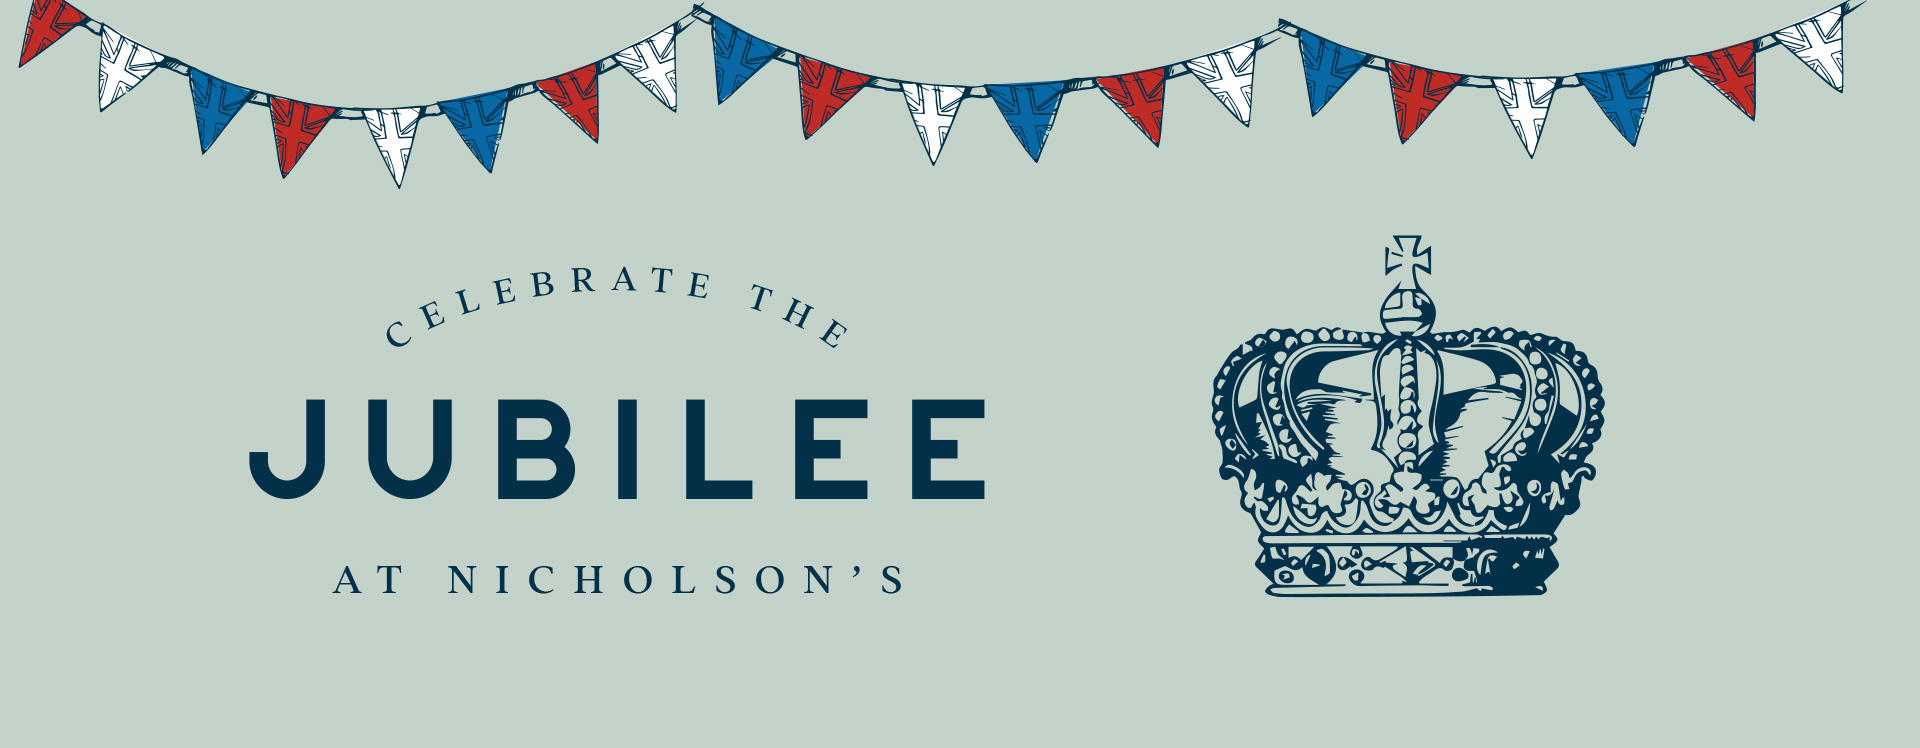 Jubilee at The Elephant and Castle